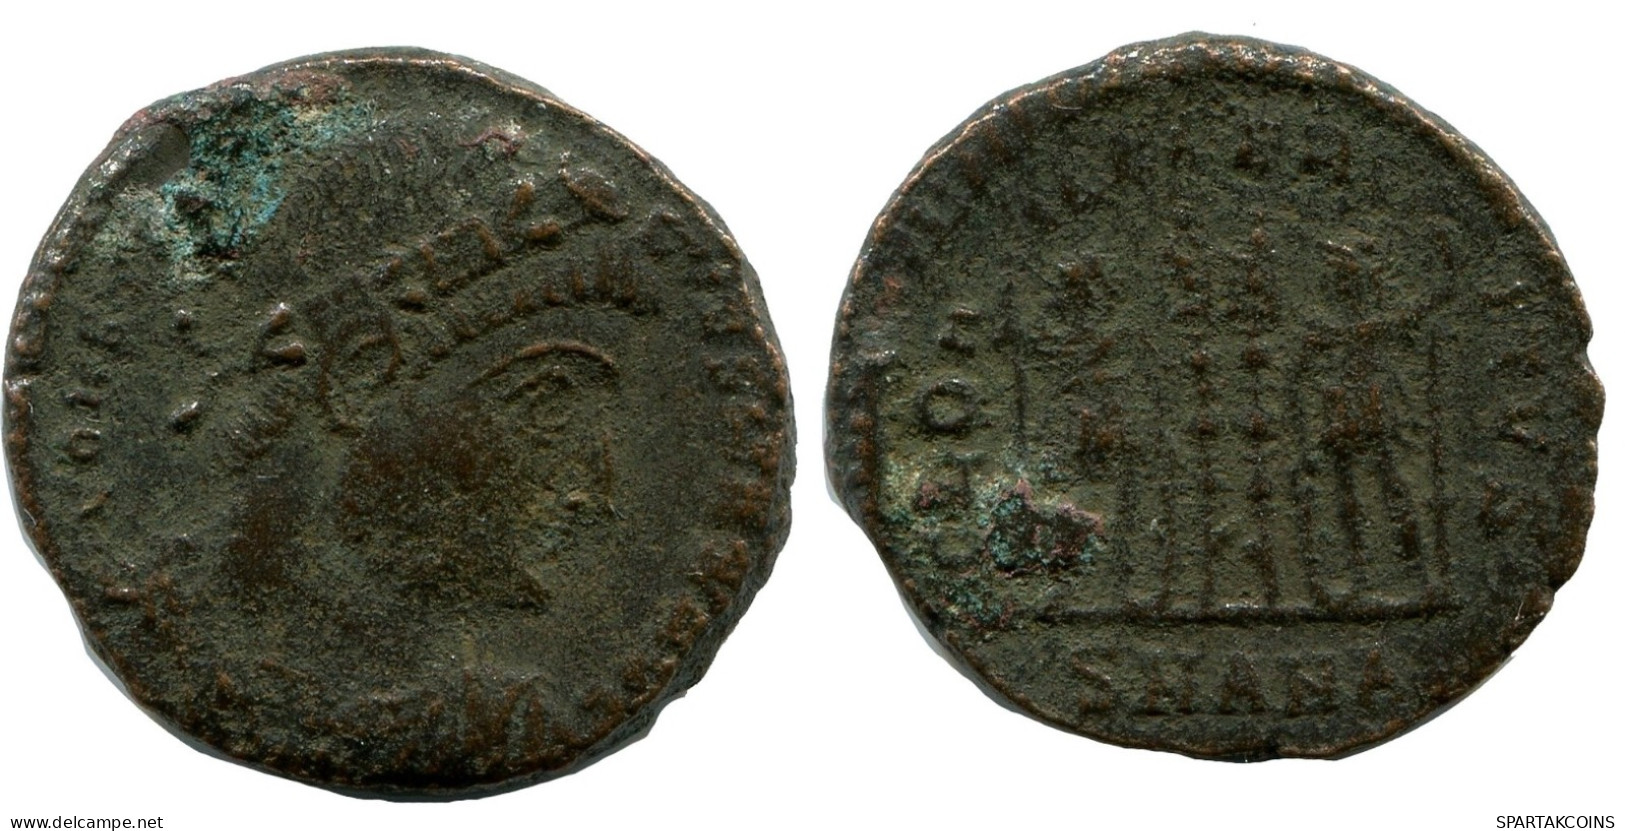 CONSTANTINE I MINTED IN ANTIOCH FOUND IN IHNASYAH HOARD EGYPT #ANC10664.14.D.A - L'Empire Chrétien (307 à 363)